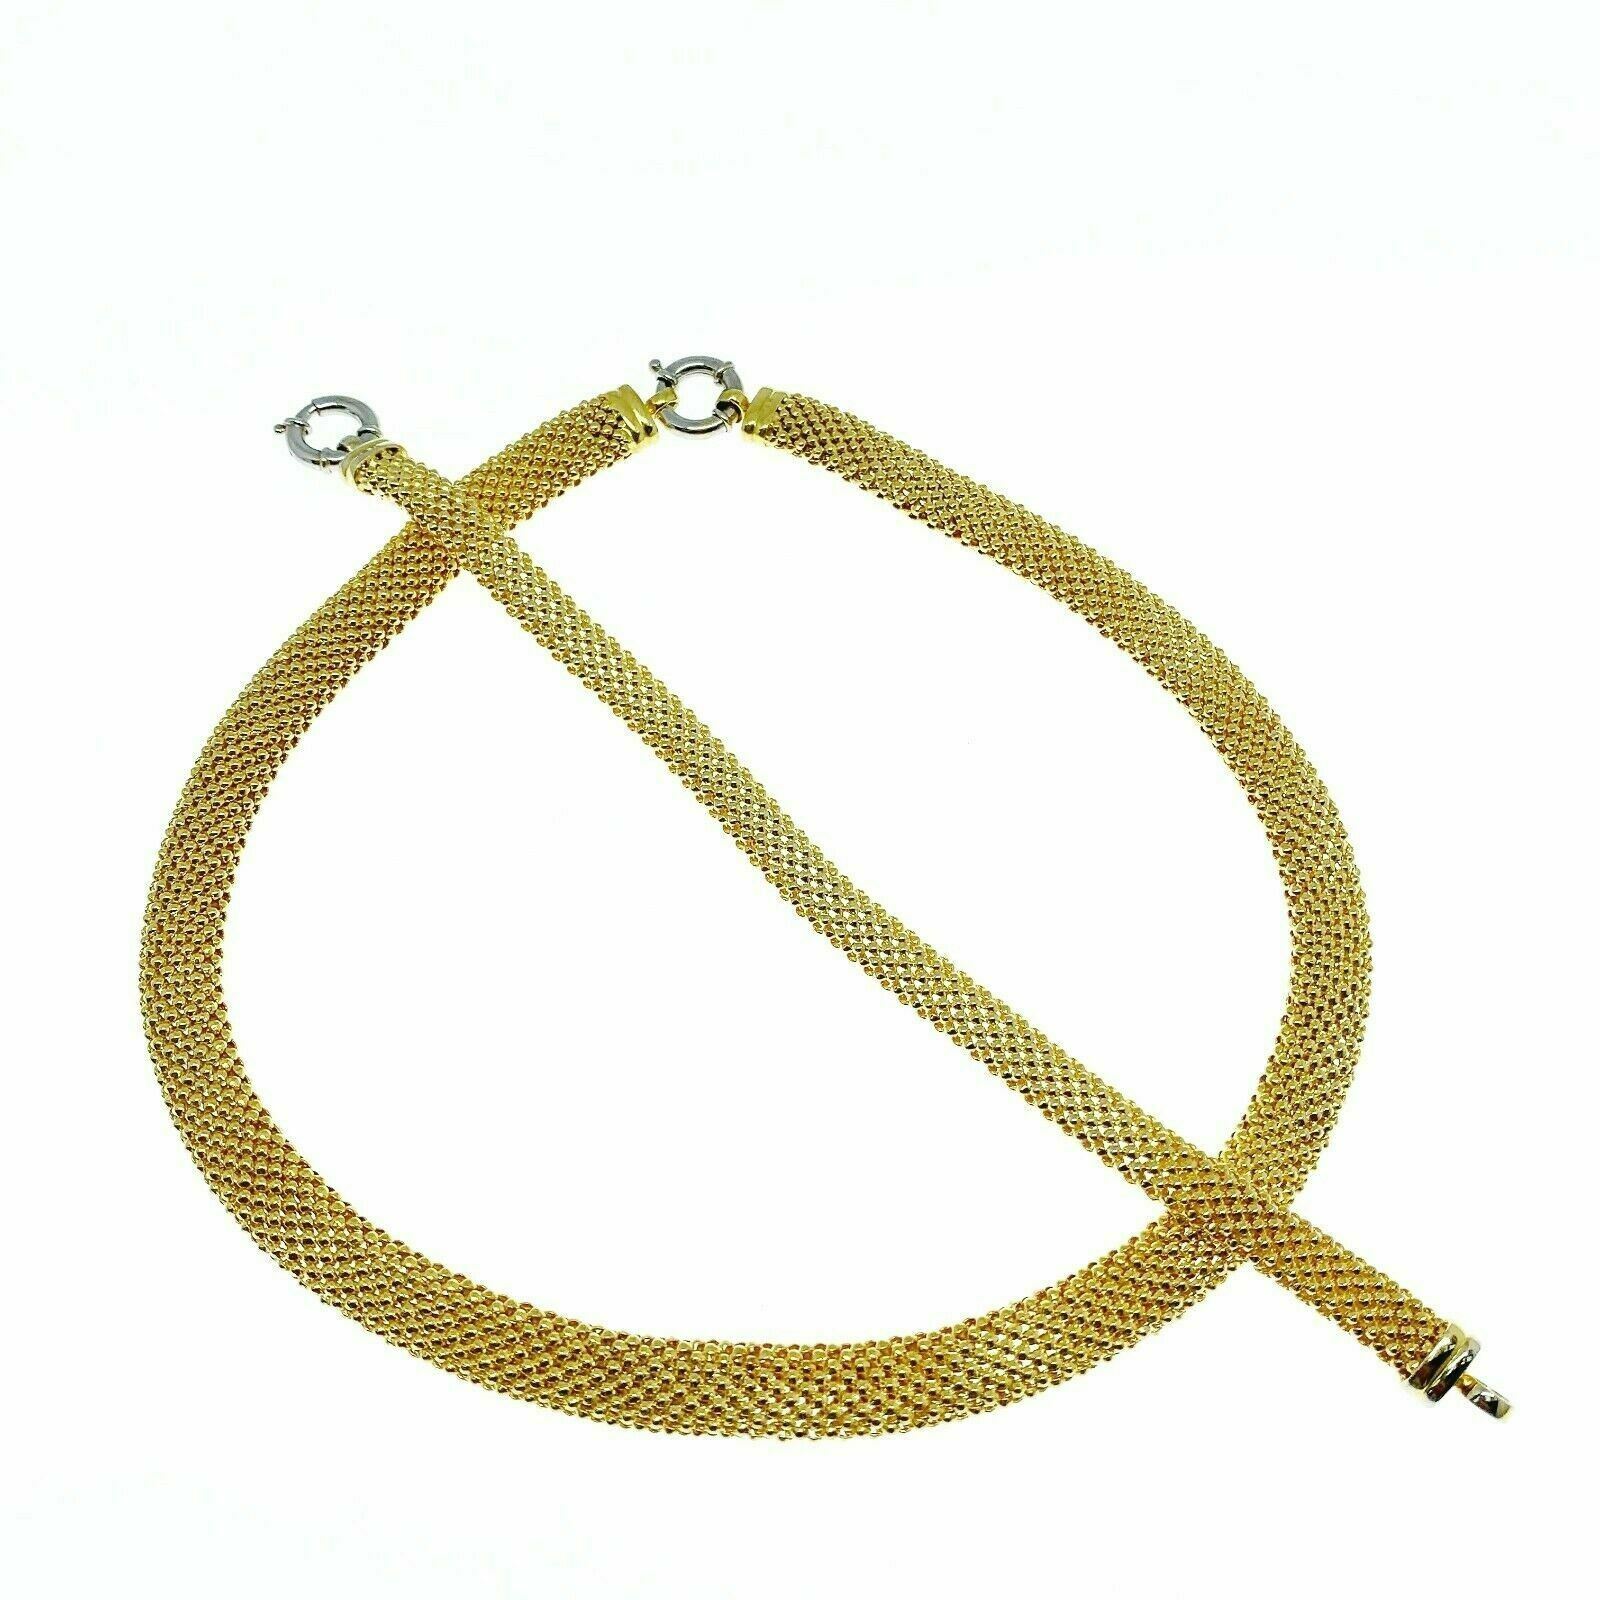 Solid 14K Yellow Gold Basketweave Sapphire Necklace and Bracelet Set 42.1 Grams